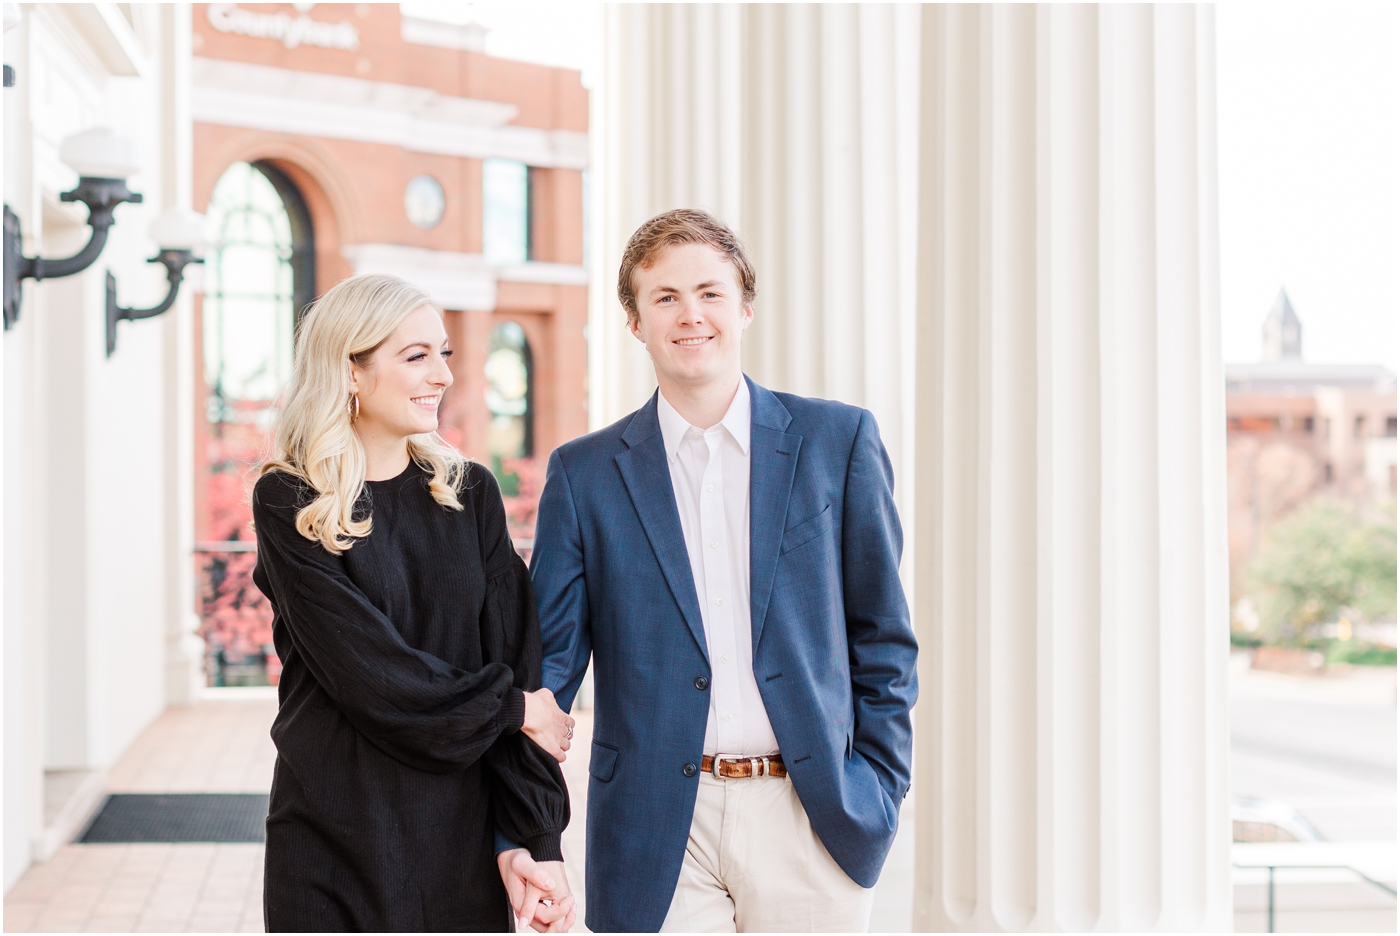 Downtown Greenville engagement session at grace church downtown